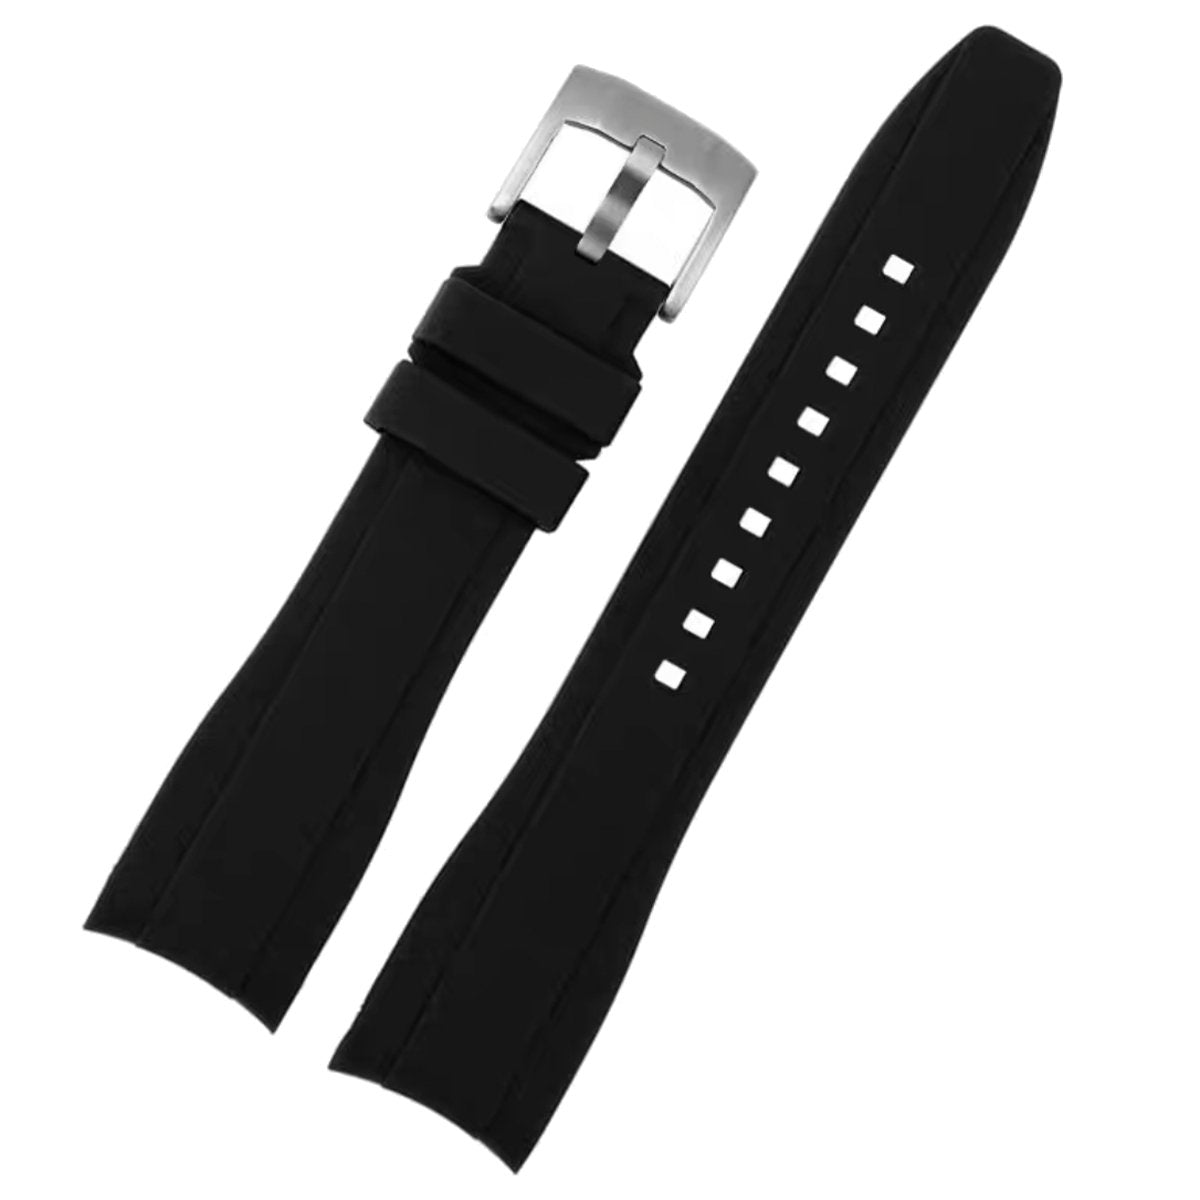 Dexter Silicone Curved Lug End Strap Black Silver Pin Buckle (Rolex Replacement) -StrapSeeker